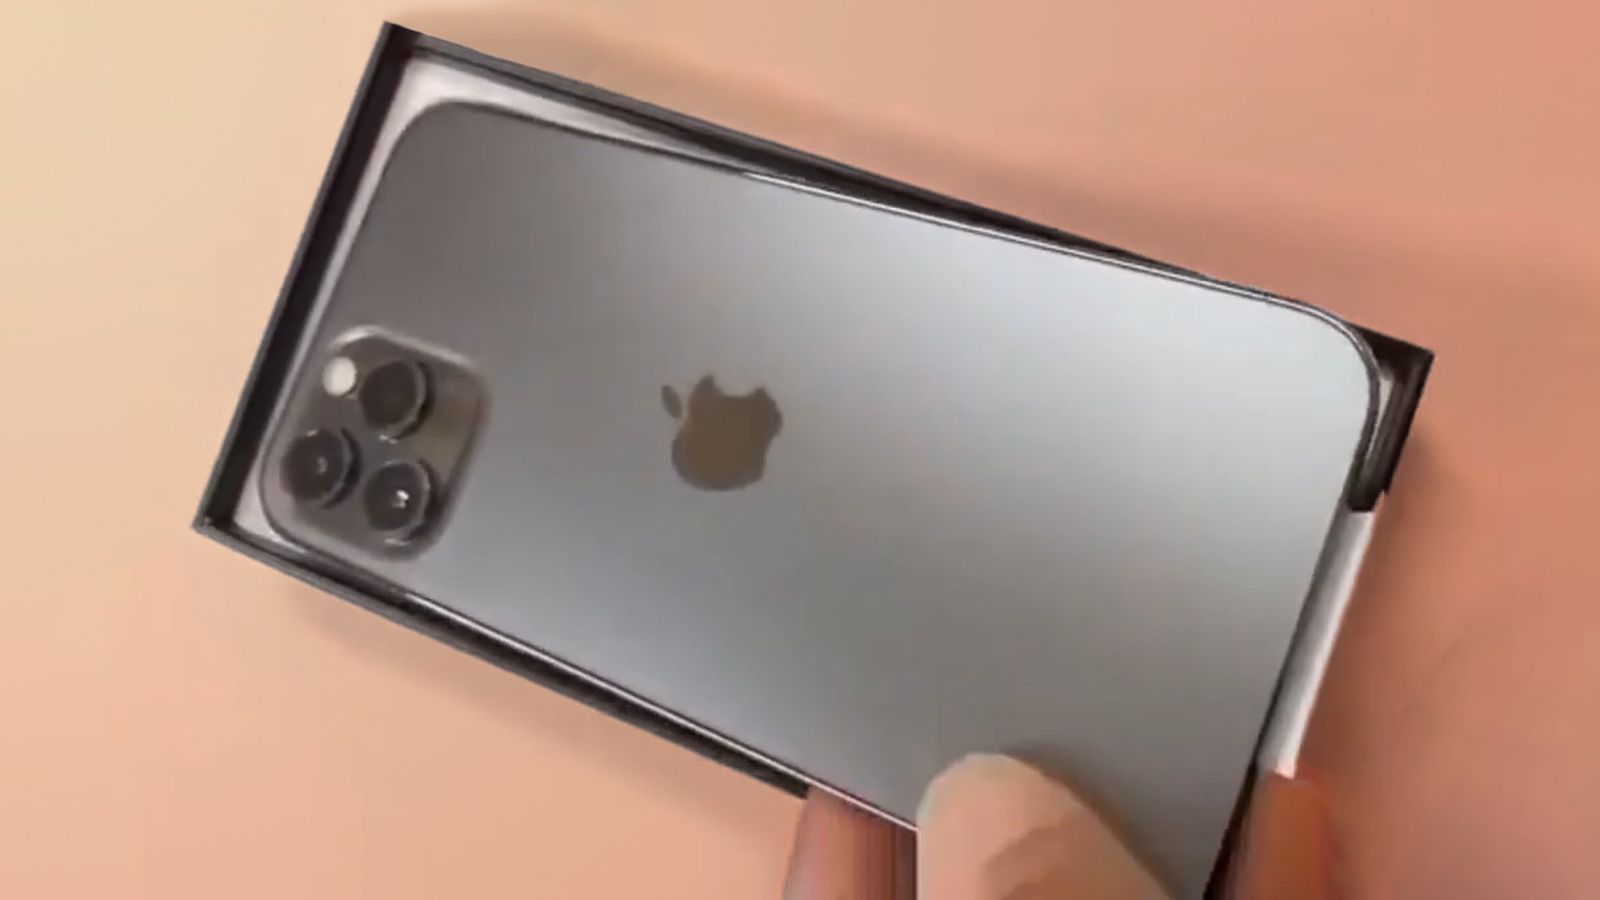 Iphone 12 Pro In Graphite And Magsafe Accessories Shown Off In More Unboxing Videos And Photos Buy Iphone Australia